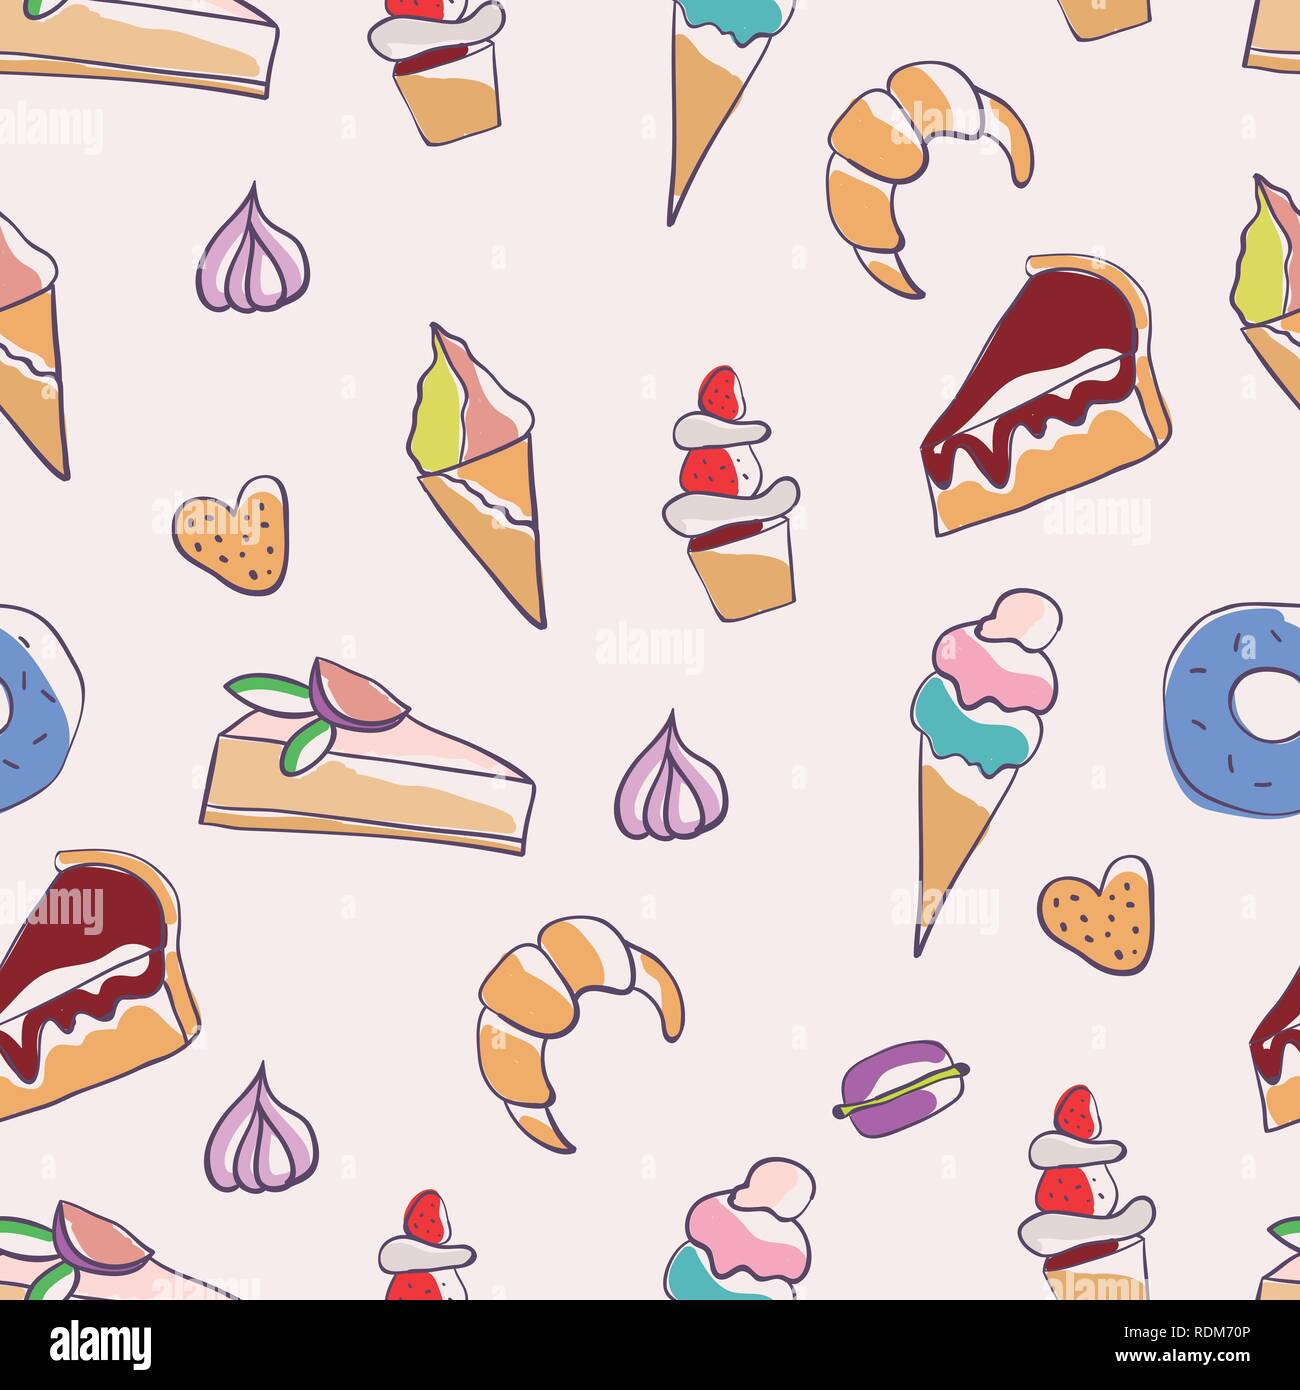 Doodle illustration of desserts and pastries. Seamless pattern with desserts. Hand drawn vector illustration made in cartoon style. Sweets and dessert Stock Vector